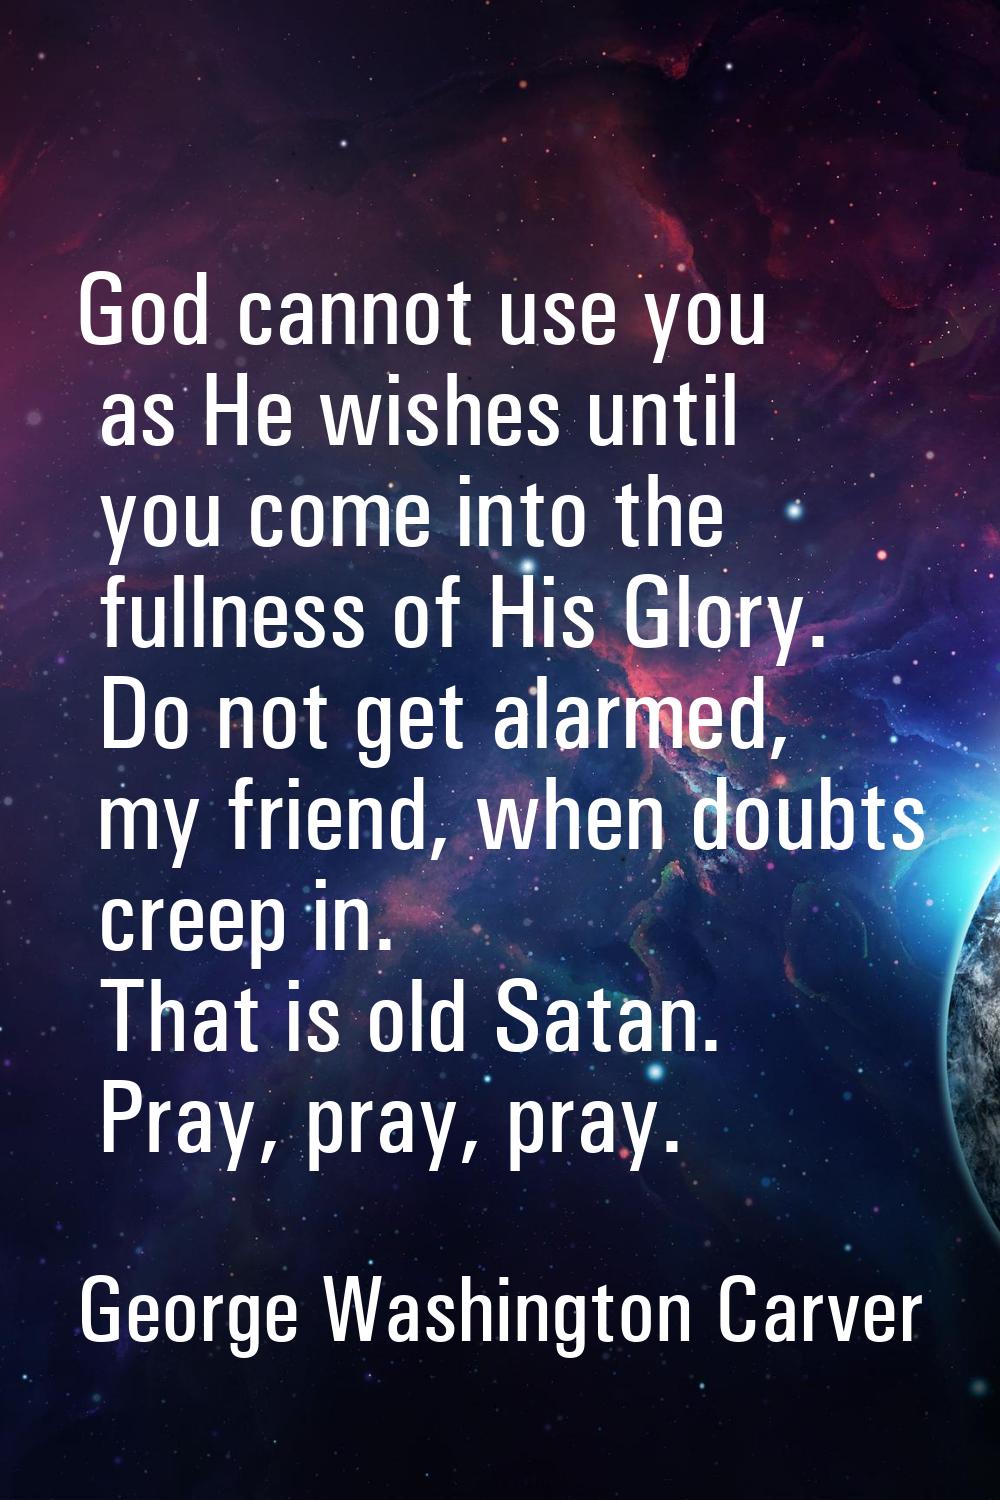 God cannot use you as He wishes until you come into the fullness of His Glory. Do not get alarmed, 